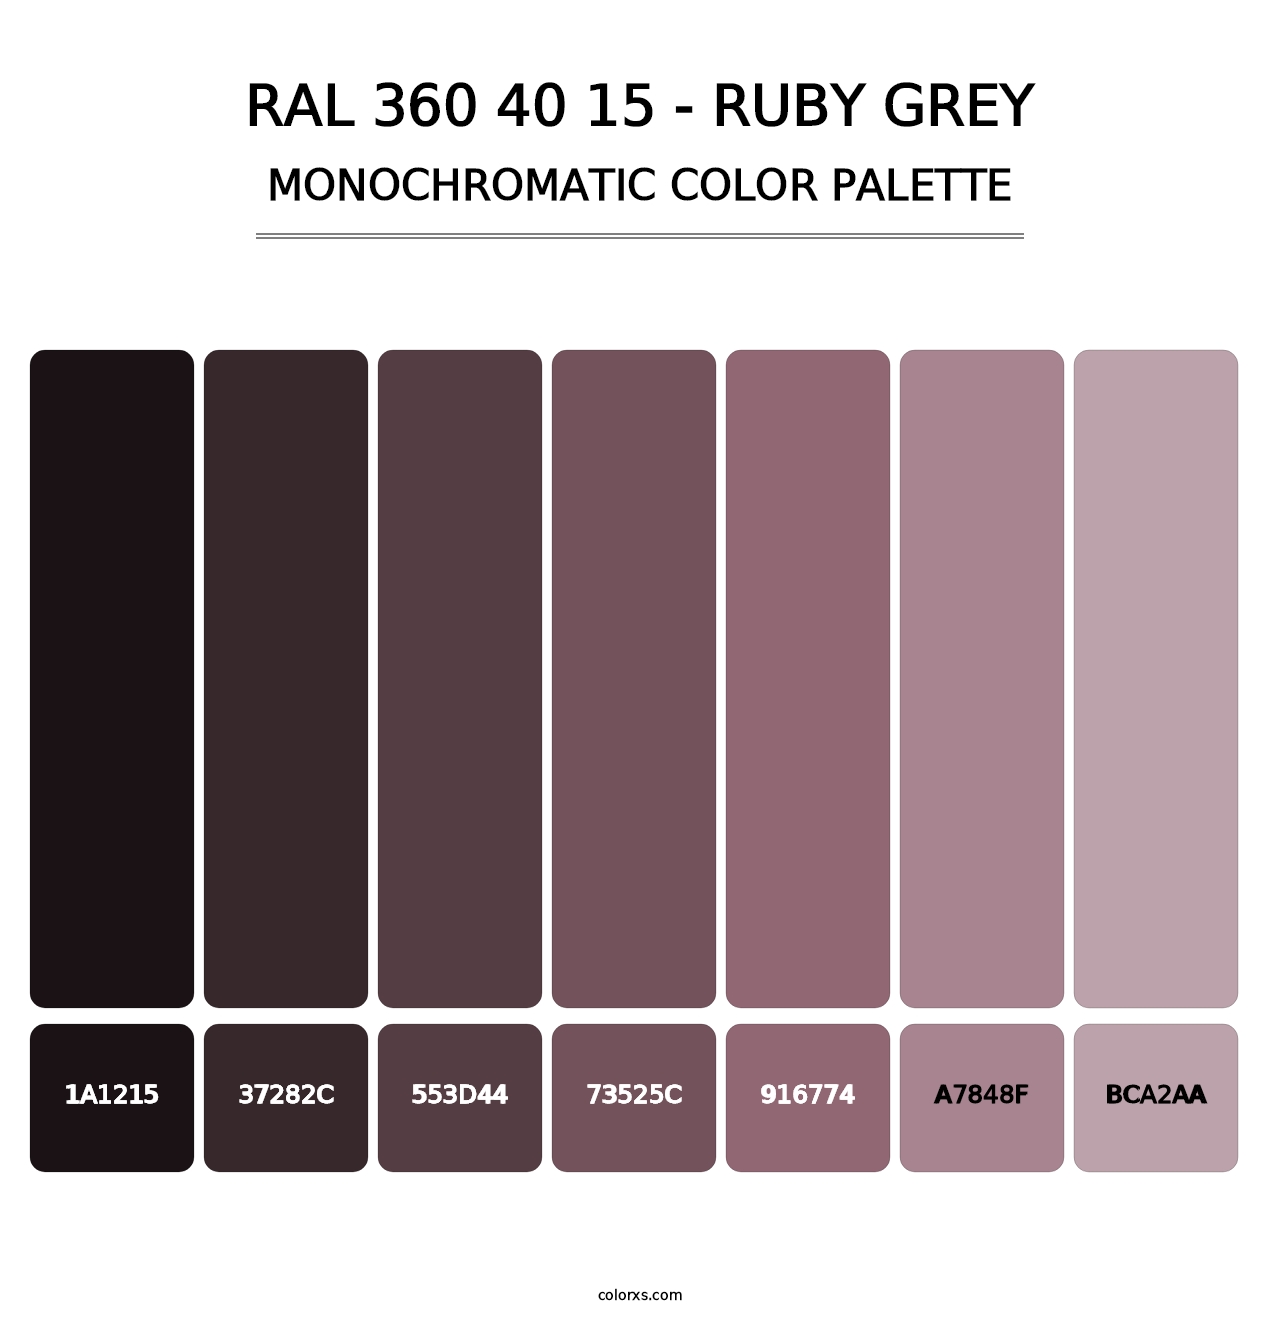 RAL 360 40 15 - Ruby Grey - Monochromatic Color Palette